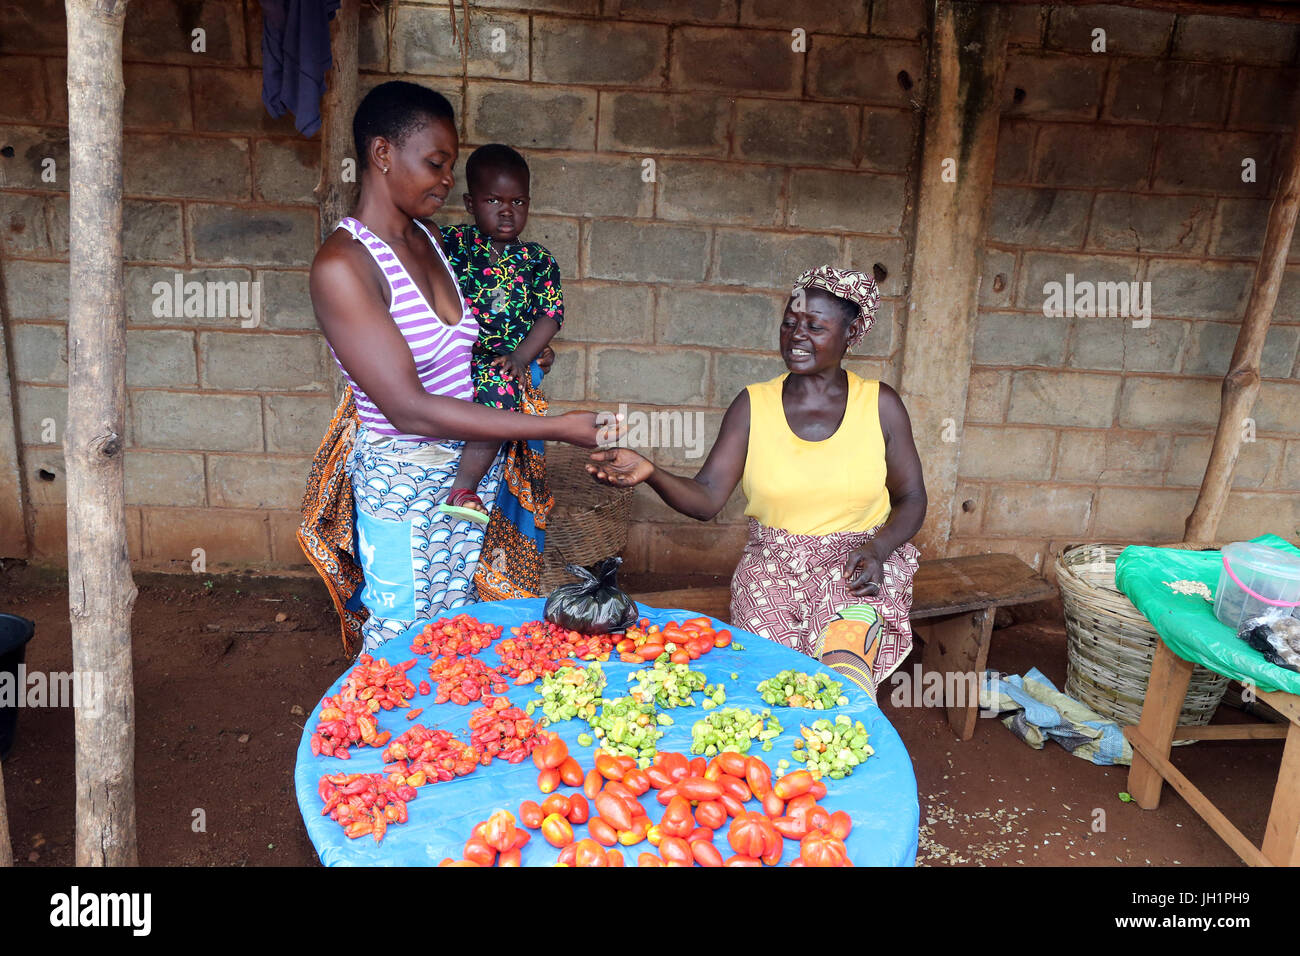 African market. Woman buying red chili and tomatoes. Togo. Stock Photo